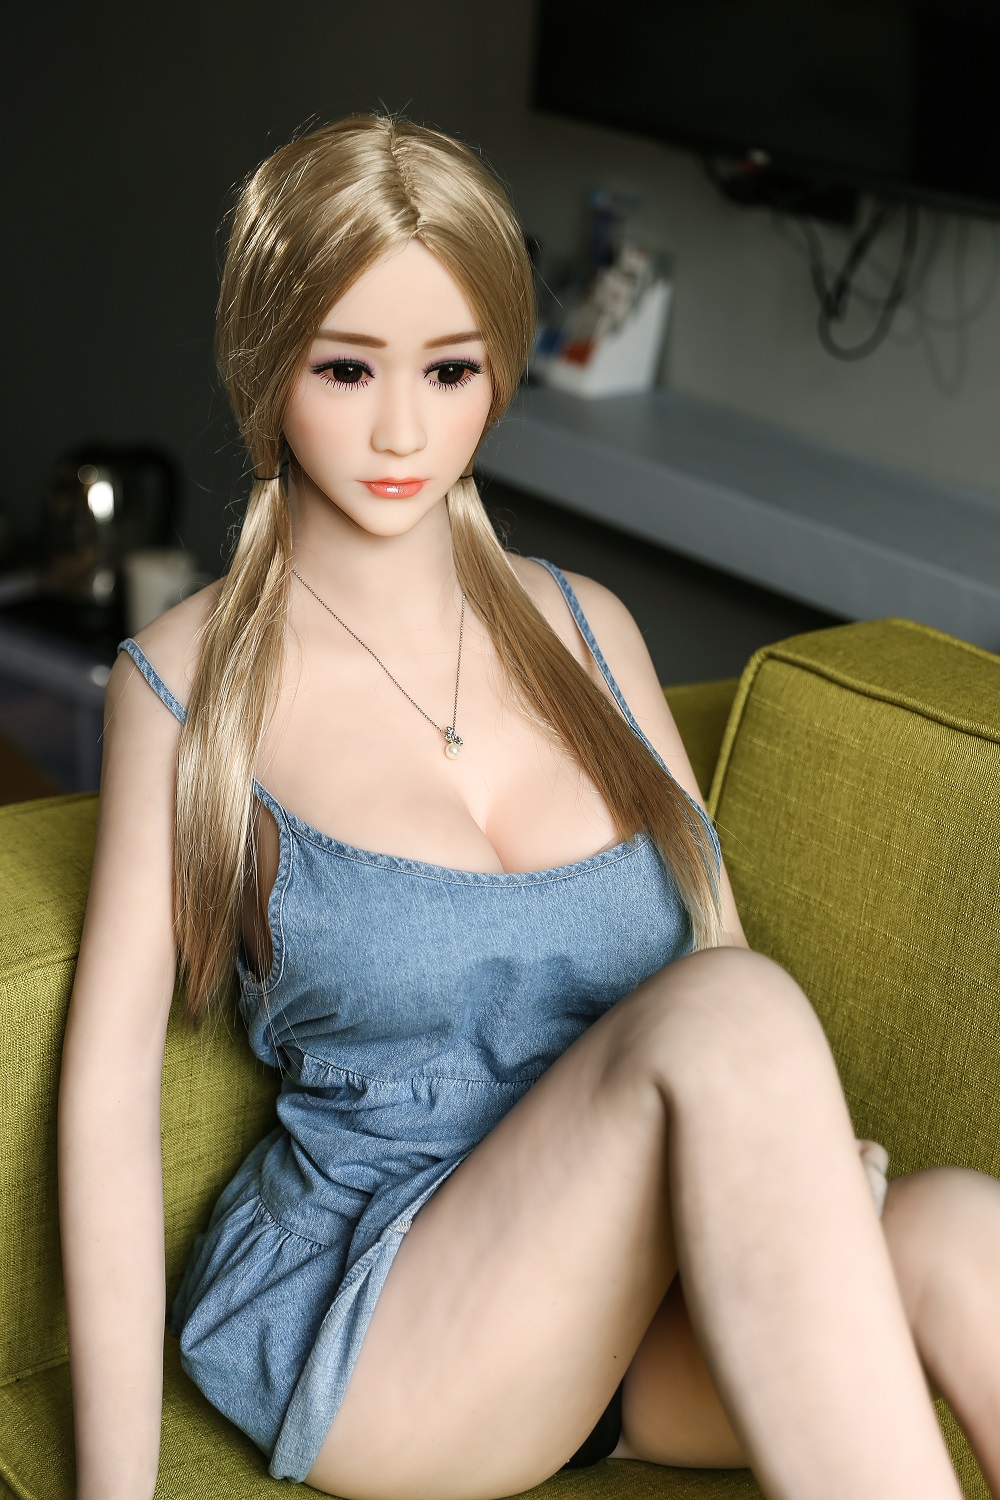 158cm Cheap Price Sex Doll Female Adult Shemale pussy naked realistic Real Love Dolls